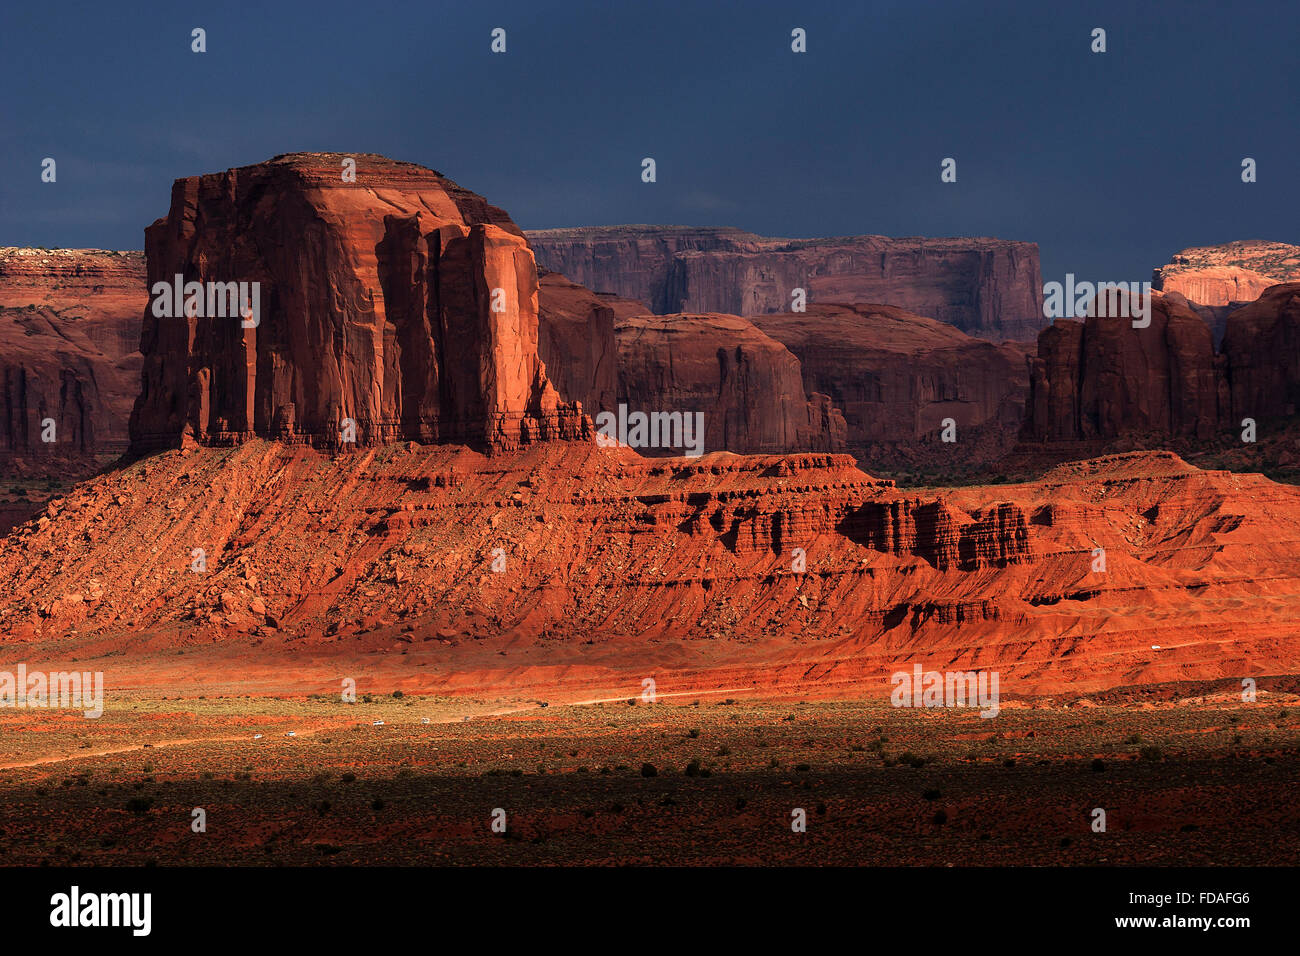 Rock formations, Elephant Butte, after storm, clouds, evening light, Monument Valley Navajo Tribal Park, Arizona, USA Stock Photo